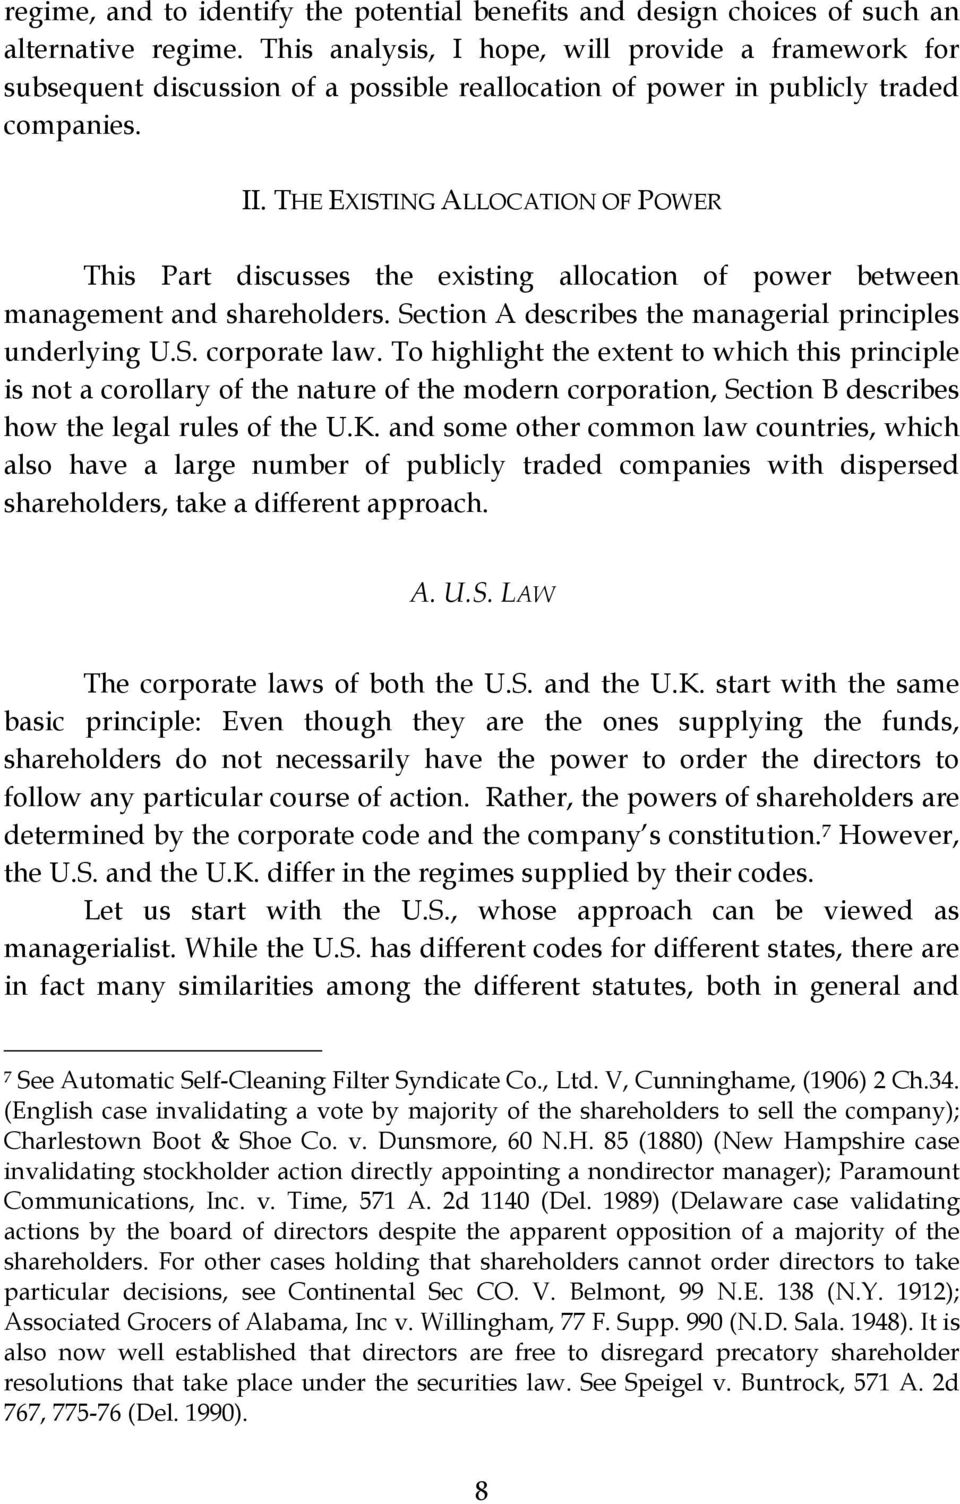 THE EXISTING ALLOCATION OF POWER This Part discusses the existing allocation of power between management and shareholders. Section A describes the managerial principles underlying U.S. corporate law.